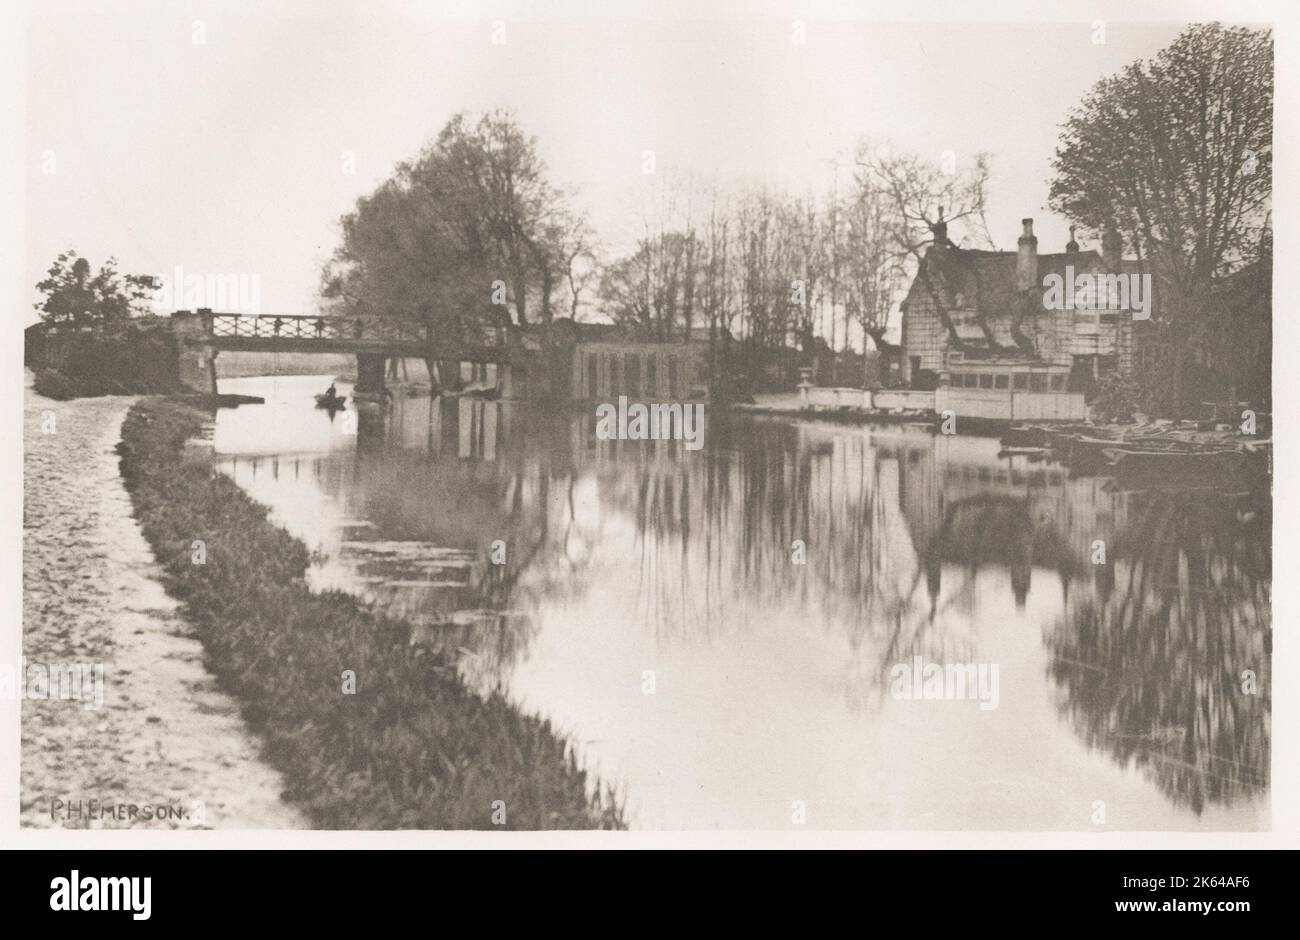 Vintage 19th century/1900's photograph by Peter Henry Emerson. Emerson was a British writer and photographer. His photographs are early examples of promoting straight photography as an art form. He is known for taking photographs that displayed rural settings and for his disputes with the photographic establishment about the purpose and meaning of photography. River Bank scene, Norfolk? Stock Photo